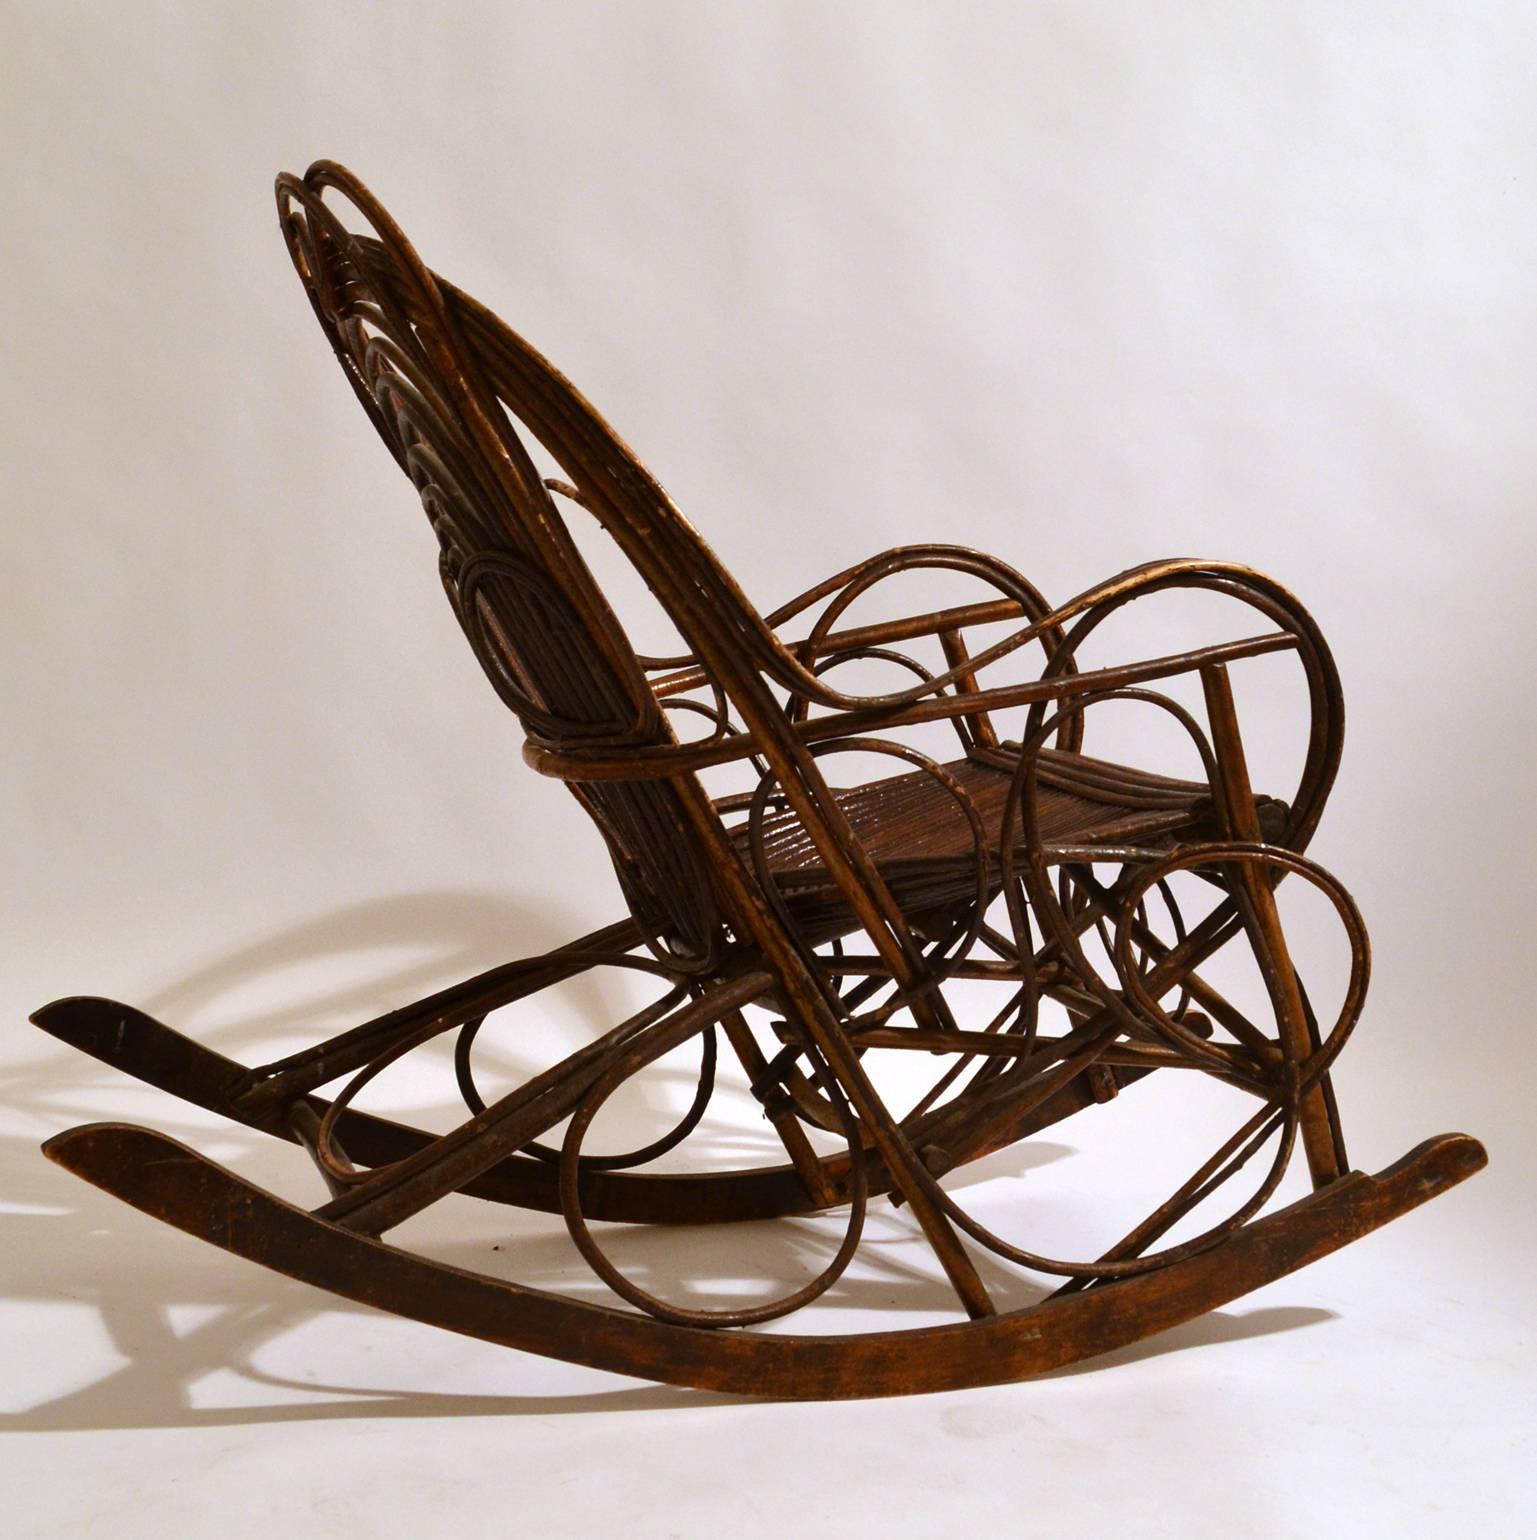 Relaxing Scandinavian early 20th century hand made rocking chair constructed in bentwood willow. Curvaceous lines create strength and make a beautiful pattern. The rocking slats are made of bent wood. The chair is extremely comfortable.